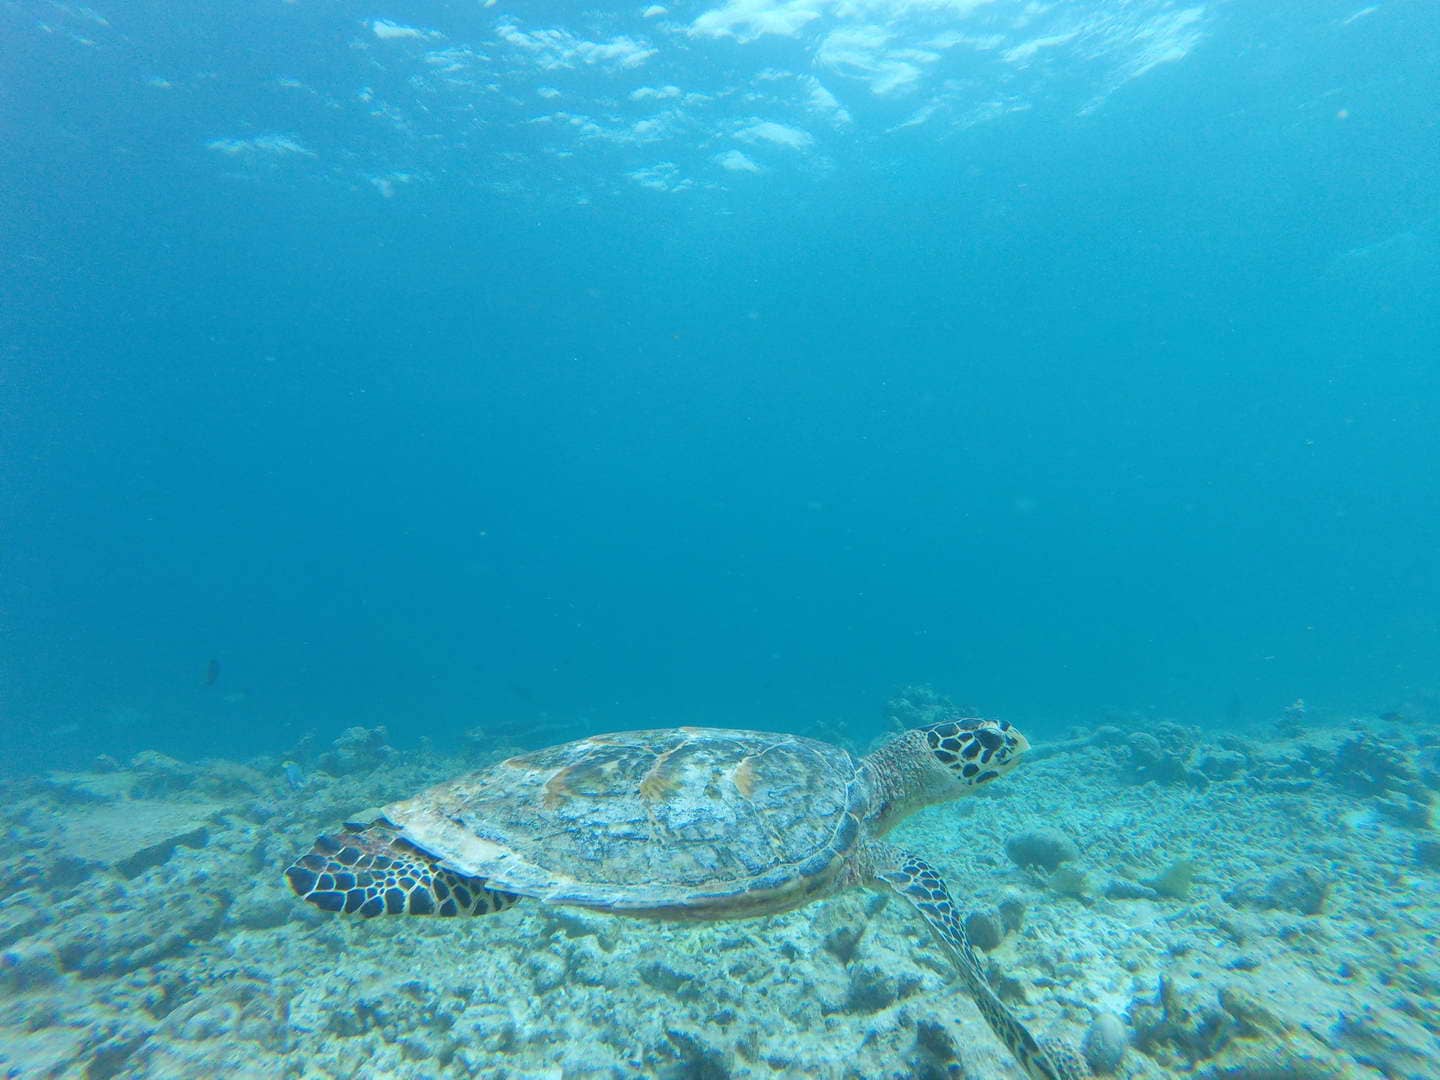 Turtles survey in the Maldives